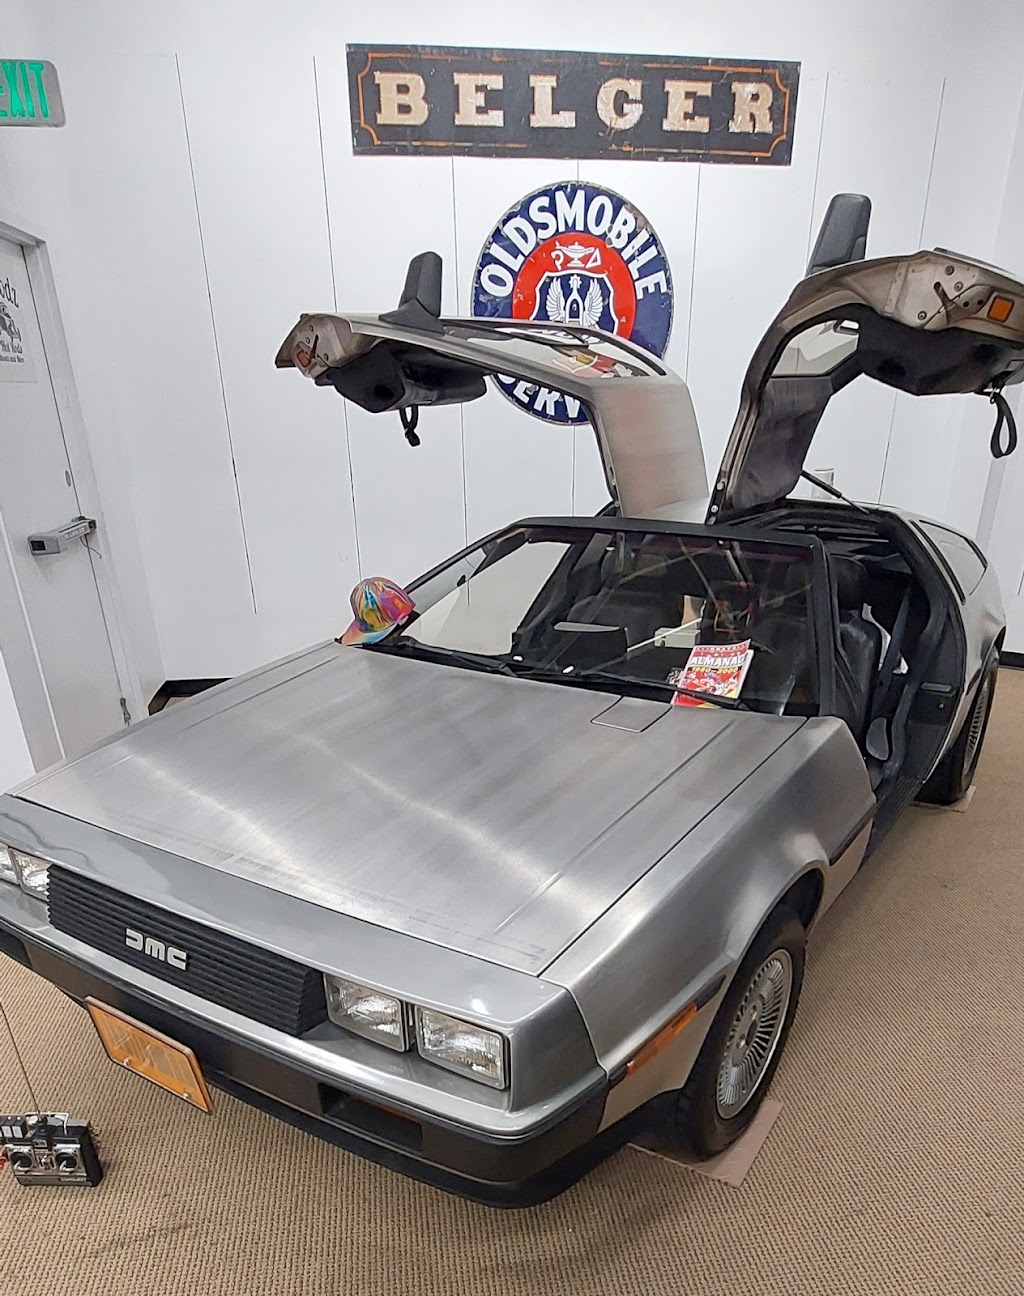 Rodz & Bodz Movie Cars & More Museum | XB, 14500 W Colfax Ave, Lakewood, CO 80401 | Phone: (303) 968-1212